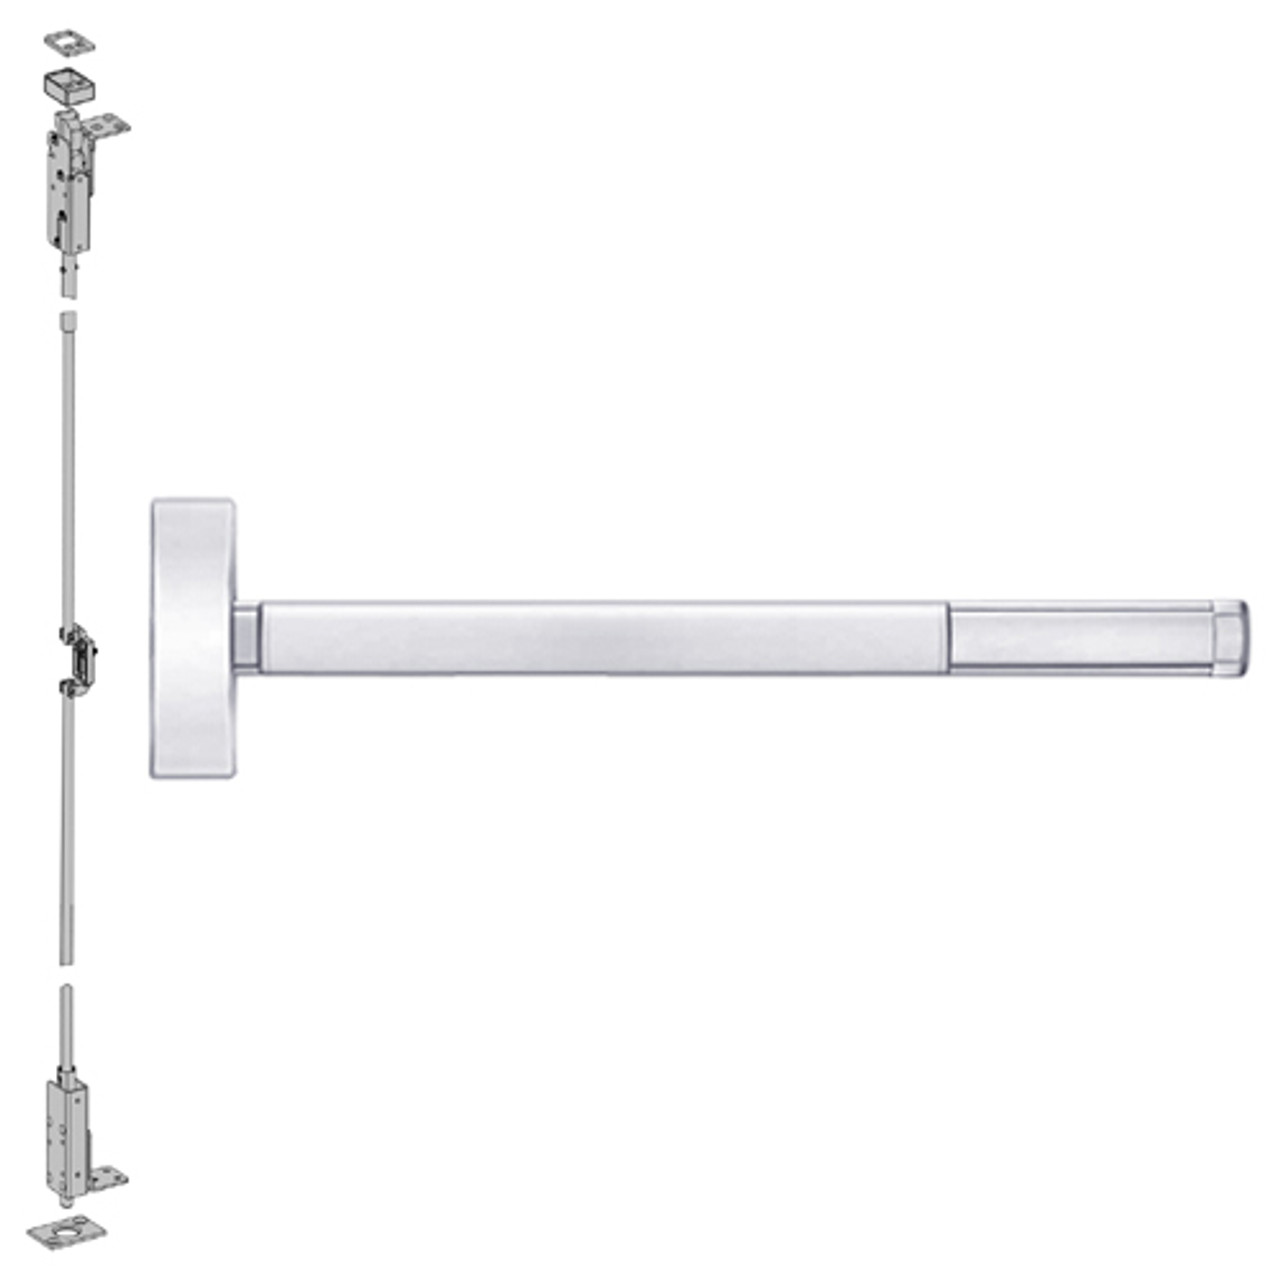 2715LBRCD-625-48 PHI 2700 Series Wood Door Concealed Vertical Rod Device Prepped for Thumbpiece Always Active with Less Bottom Rod in Bright Chrome Finish